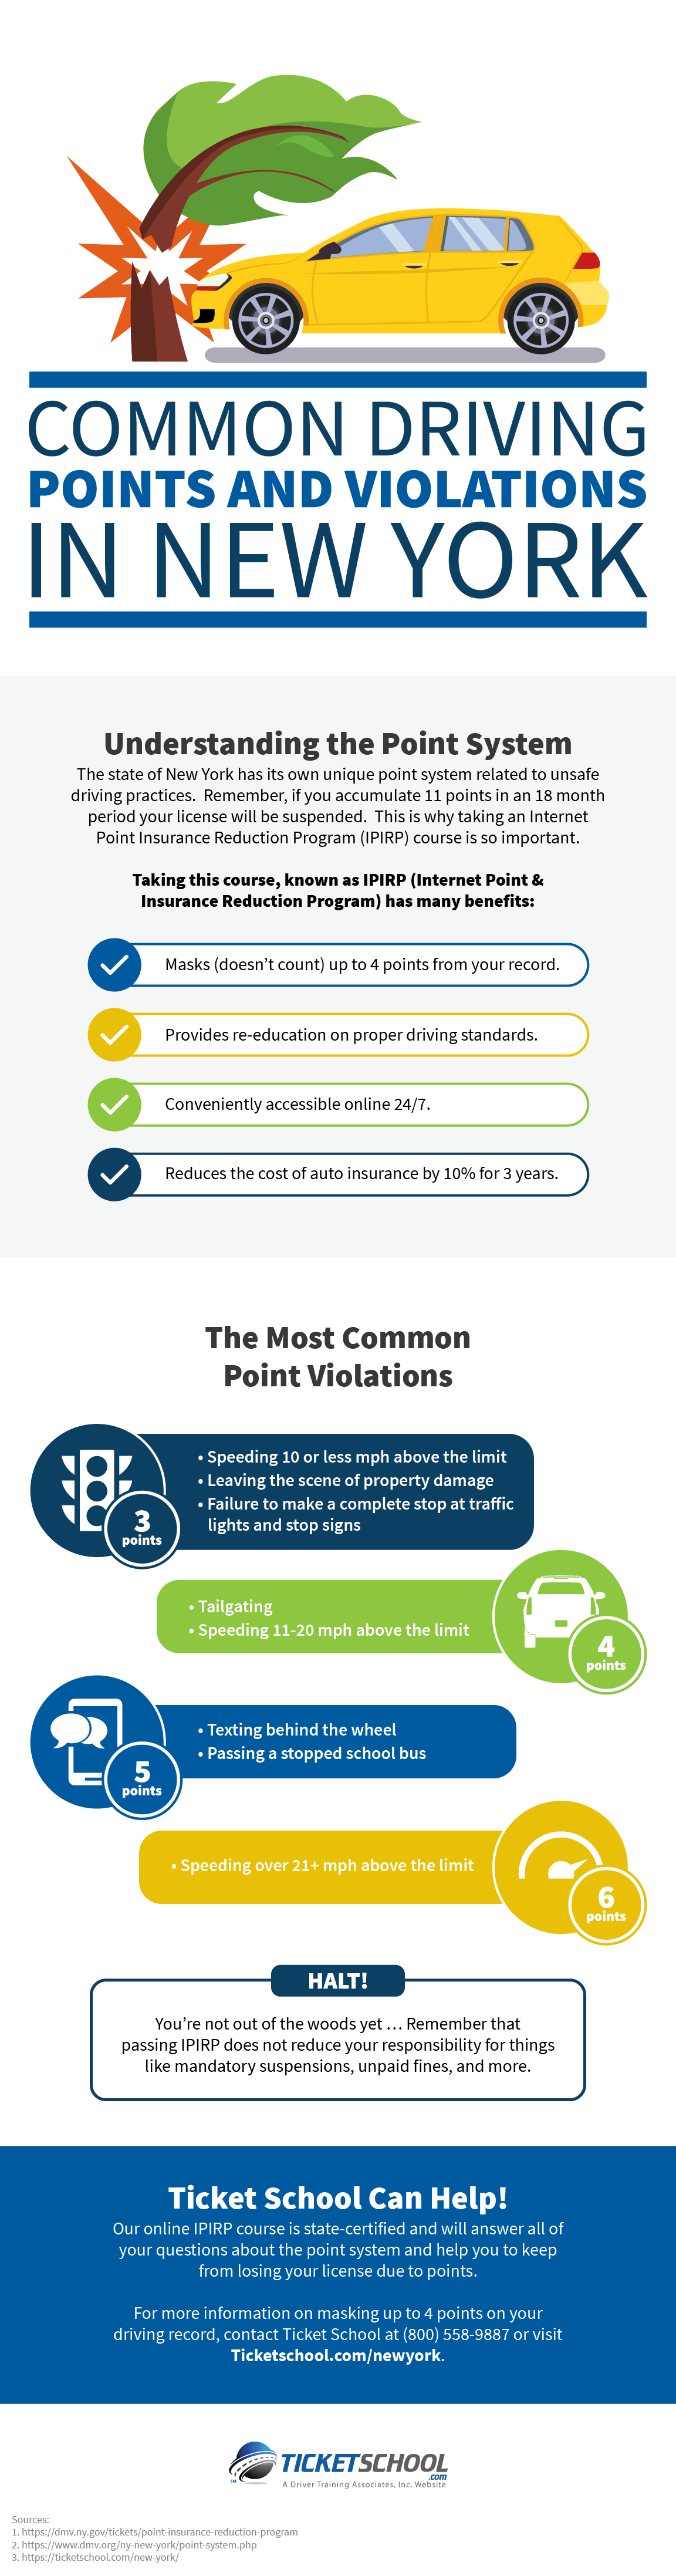 Infographic: Common Driving Points and Violations in New York